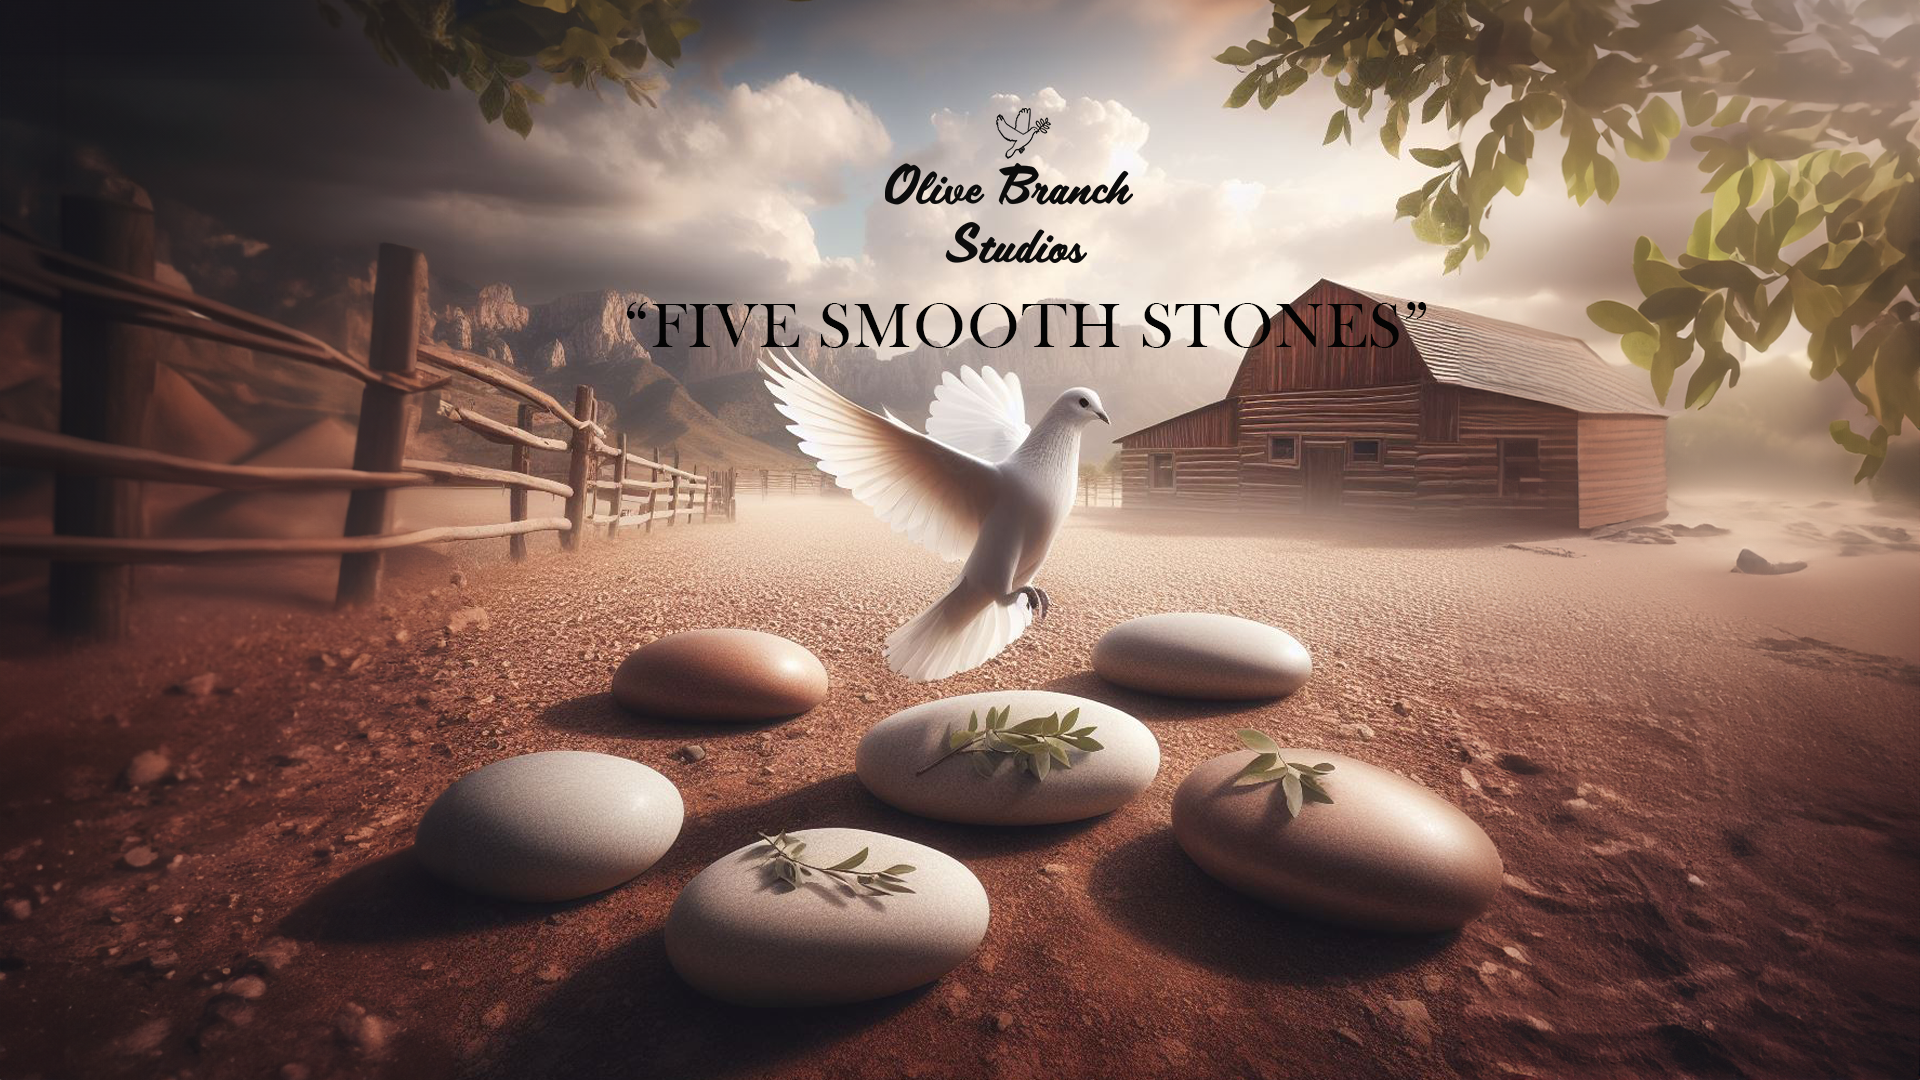 Olive Branch Film Studios Heads Into Pre-Production: "Five Smooth Stones"